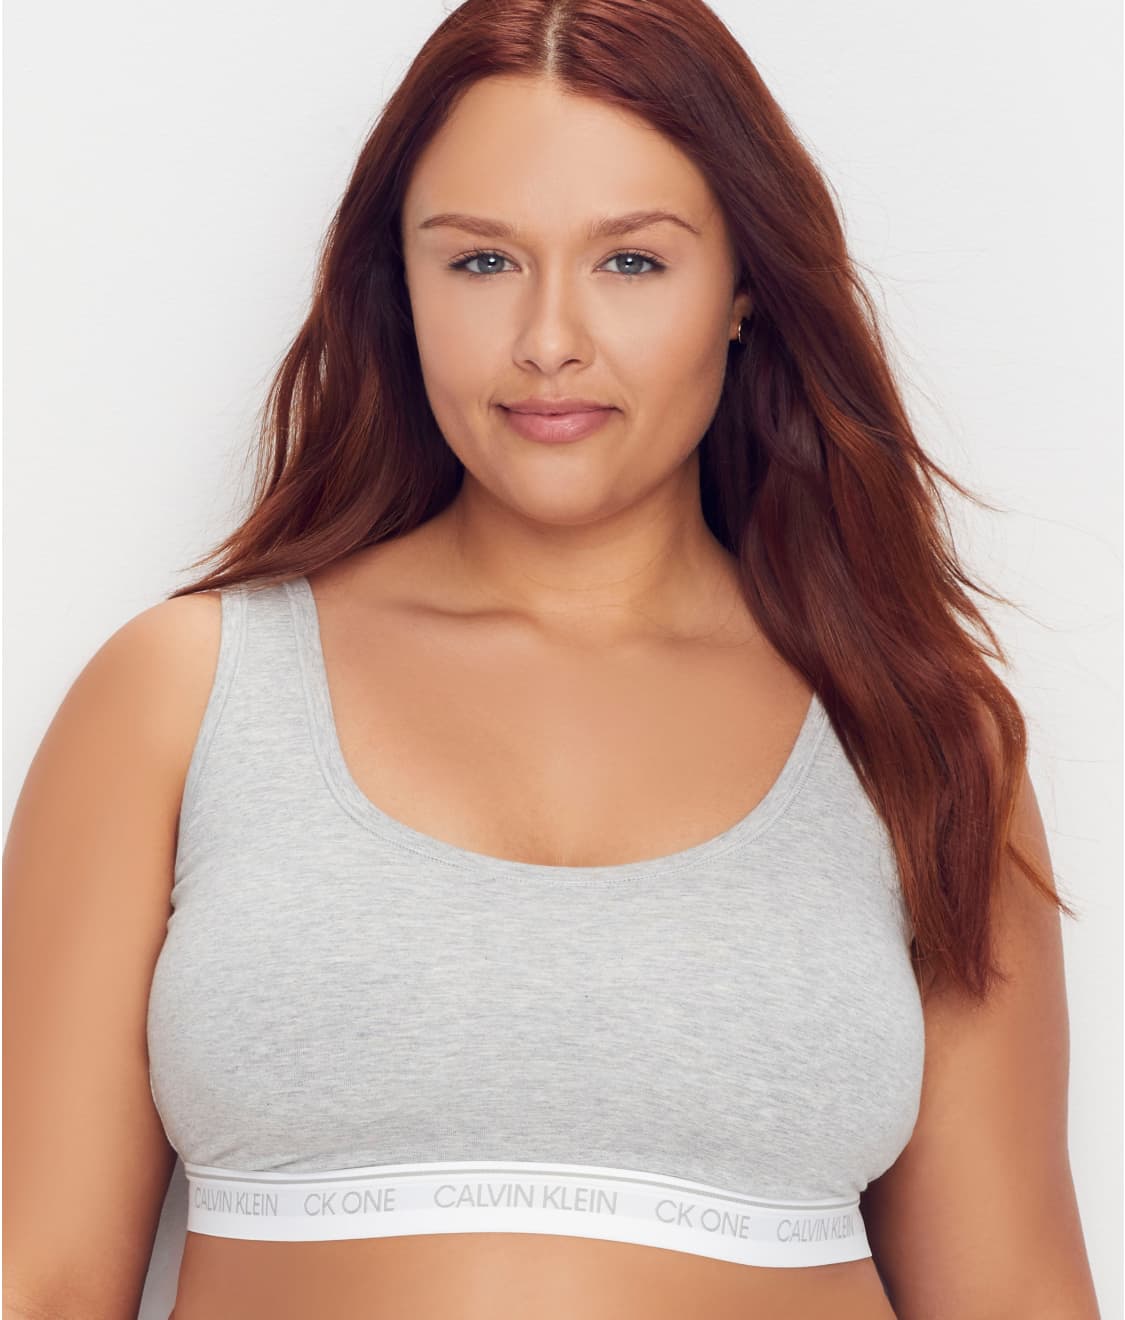 Calvin Klein Plus Size CK One Cotton lightly lined bralette in